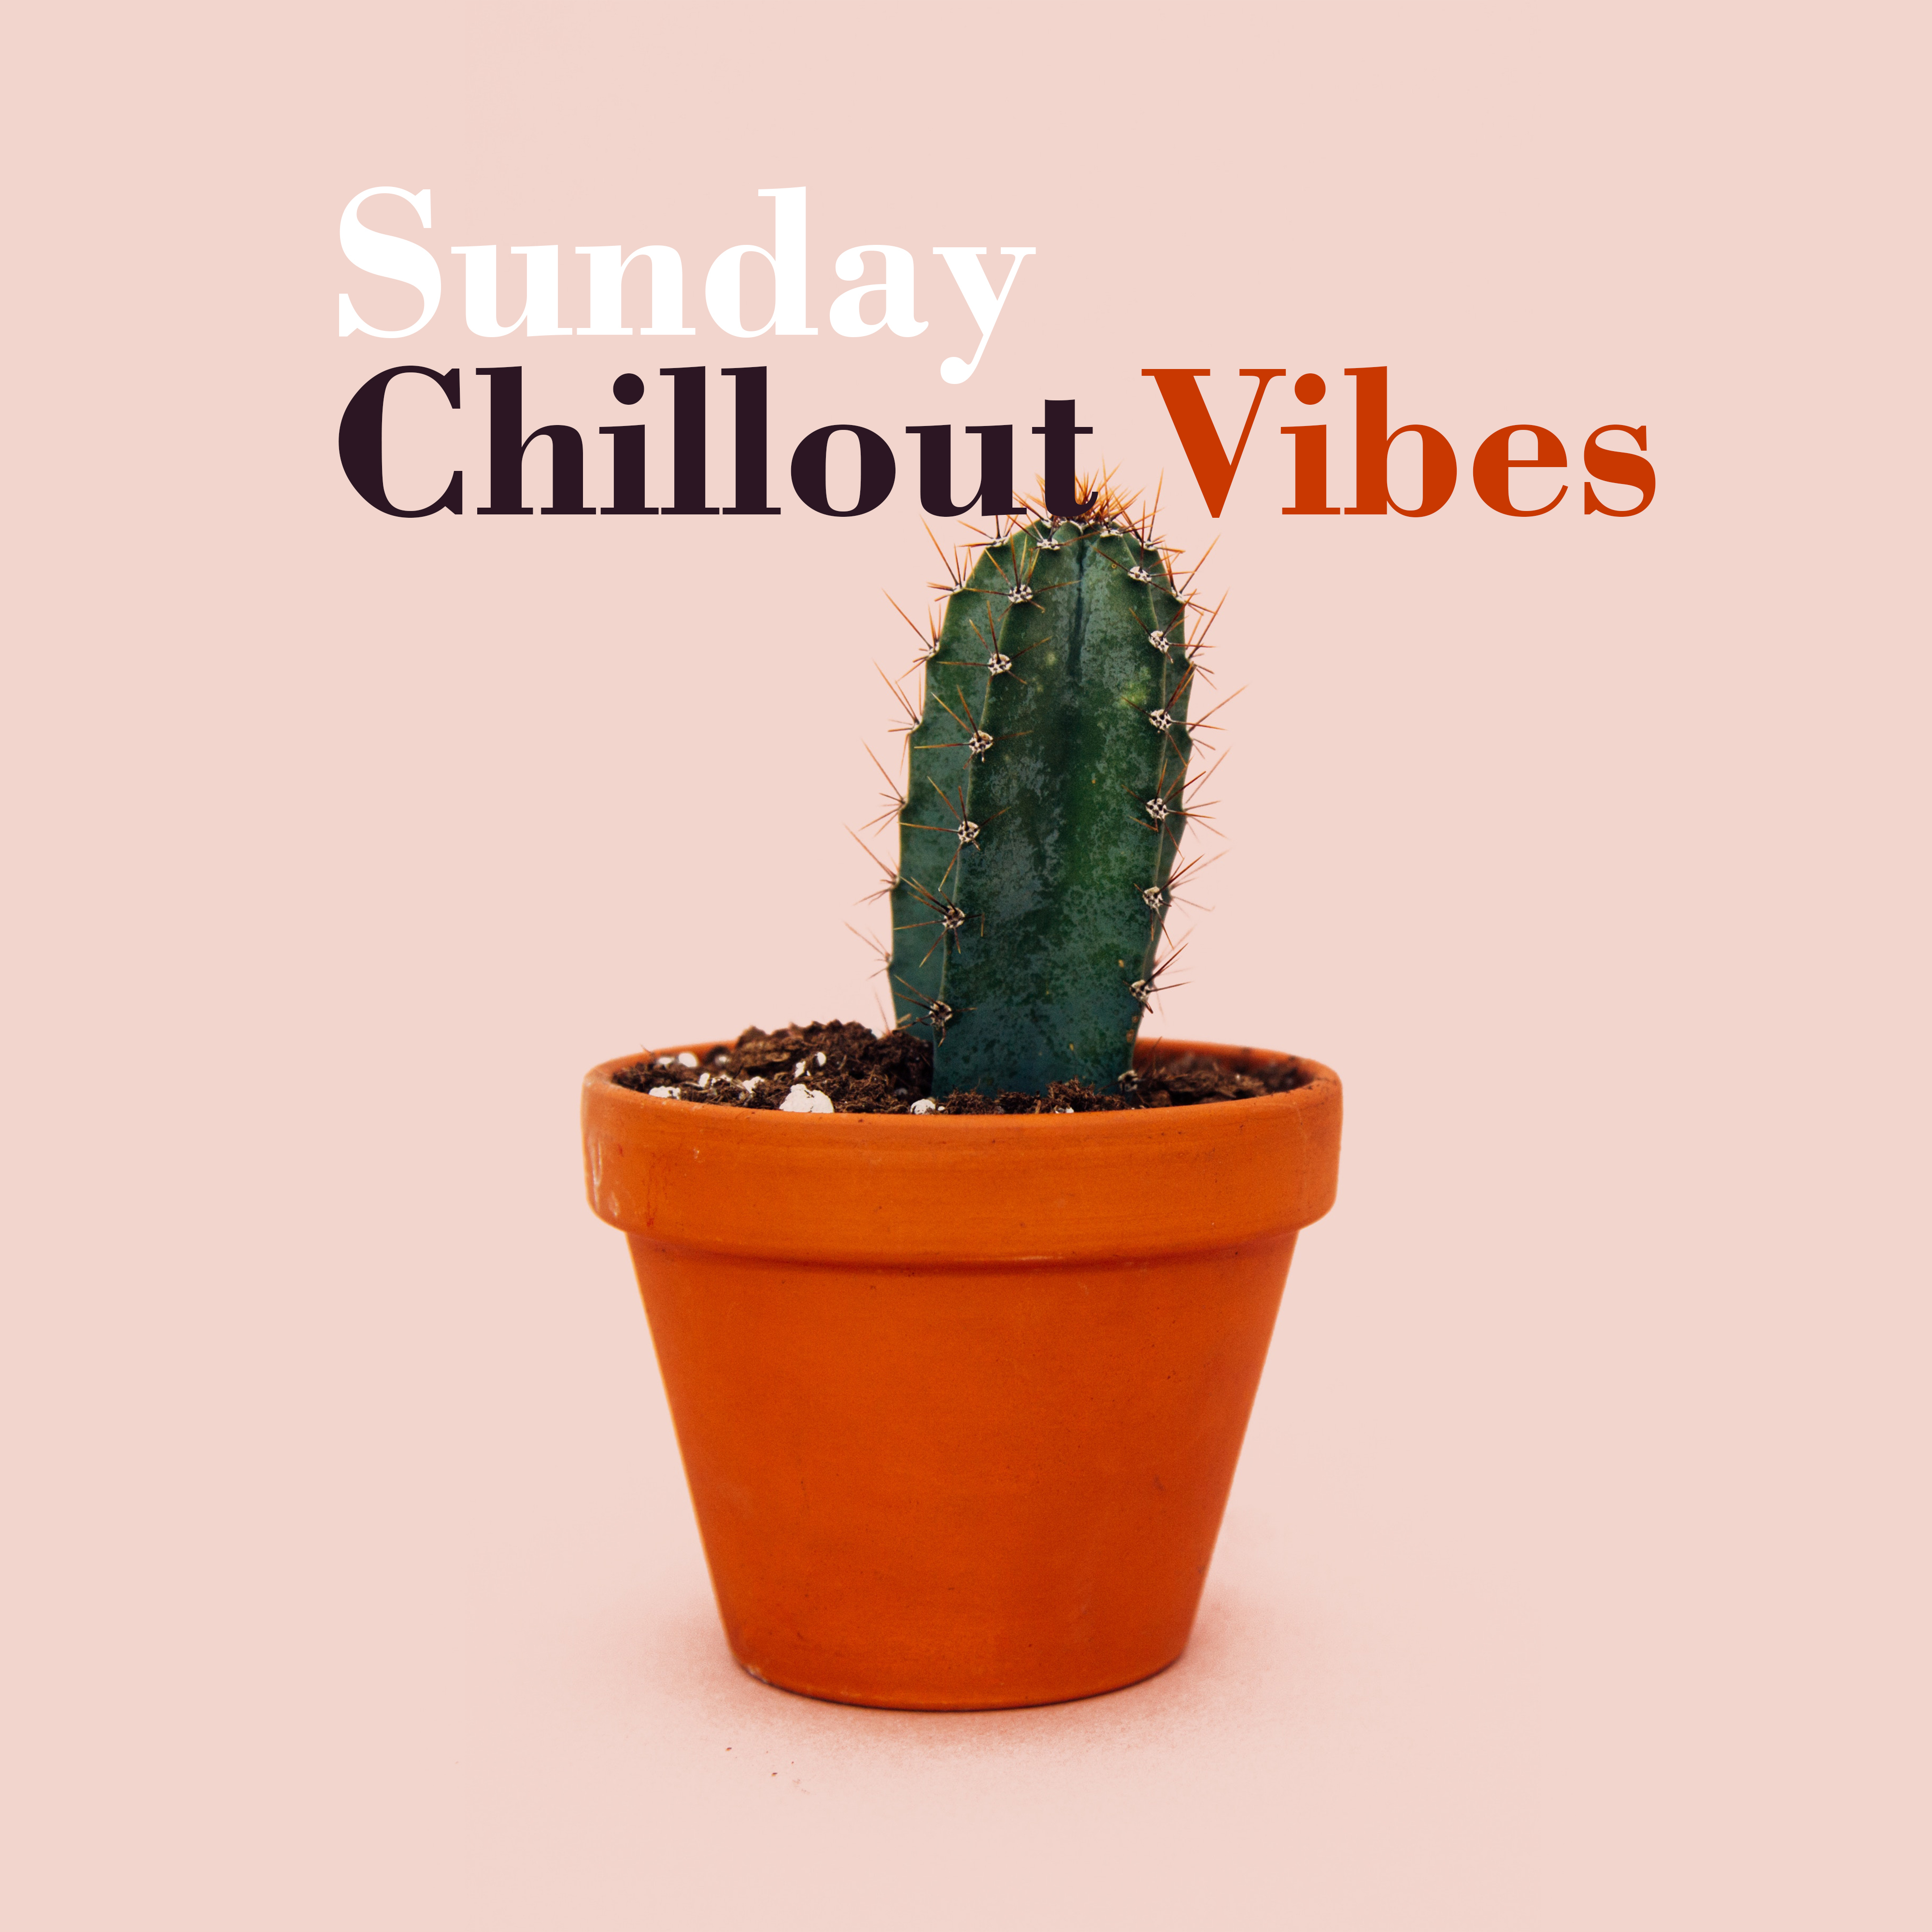 Sunday Chillout Vibes